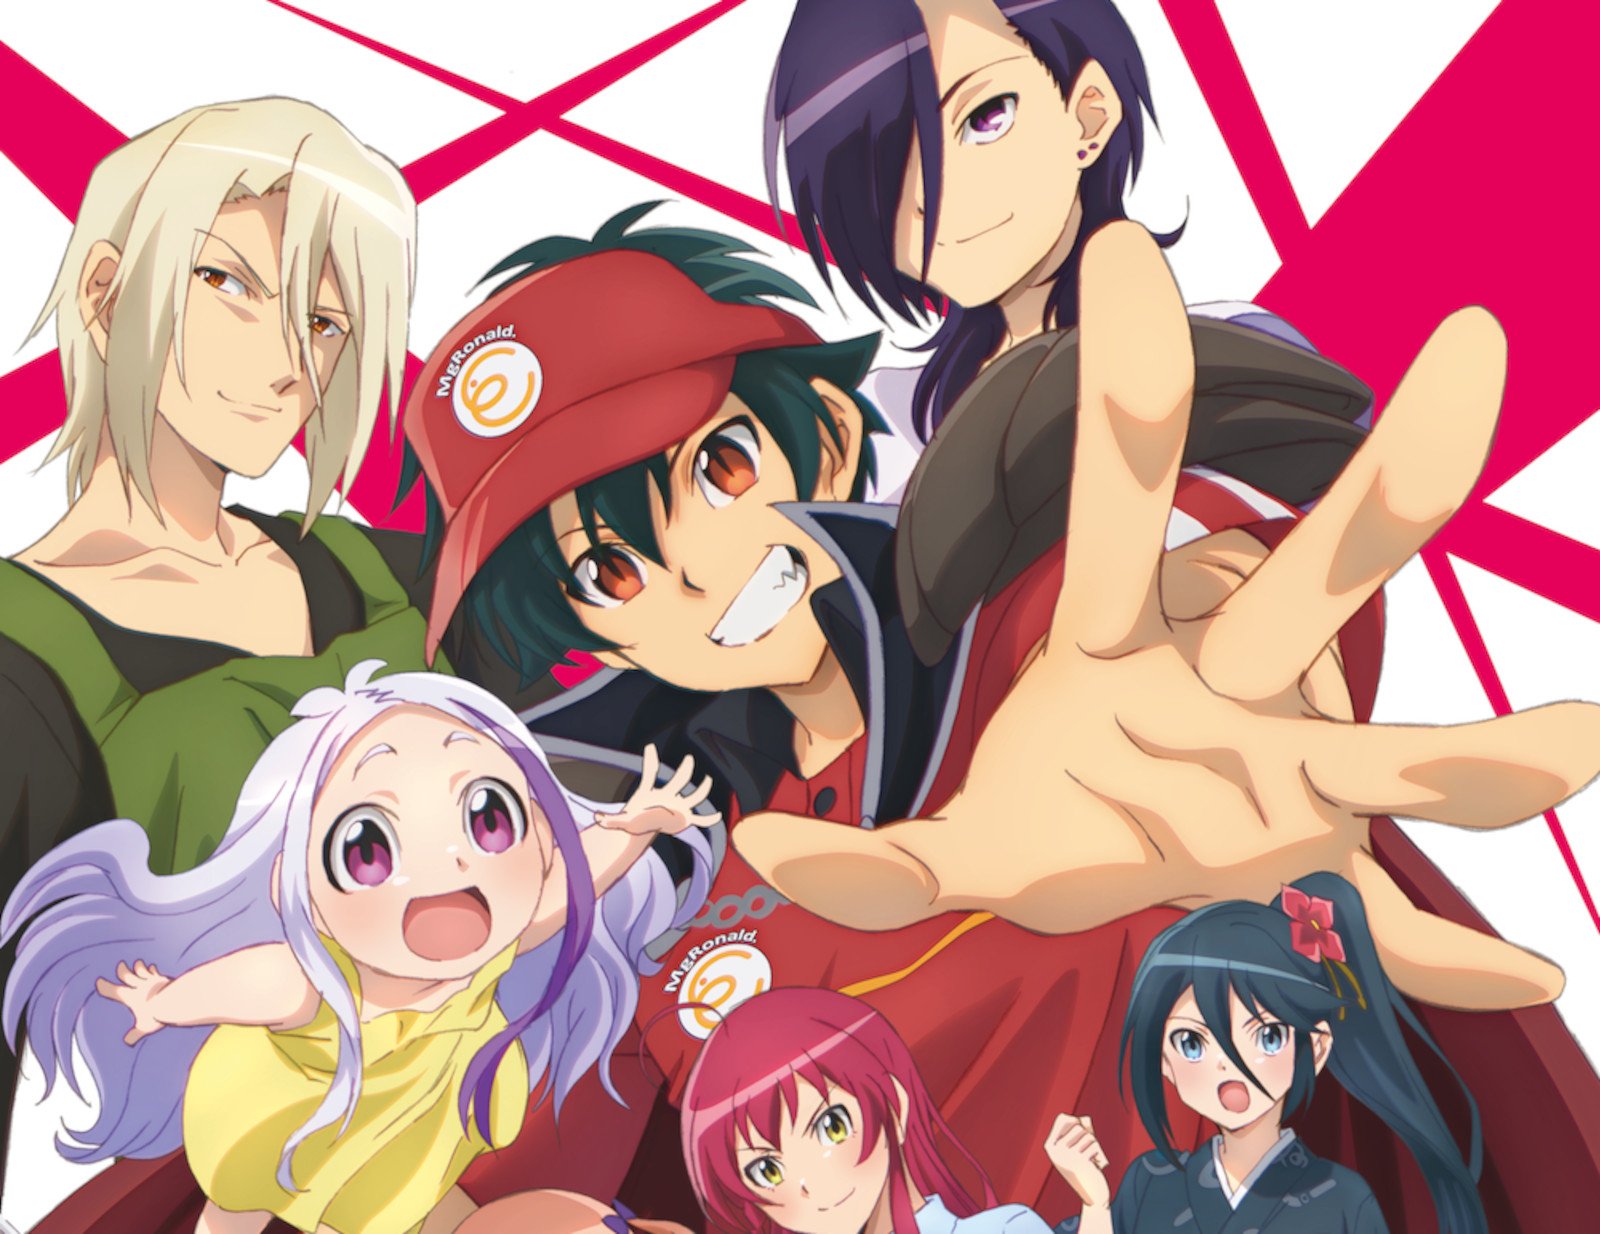 Poster art for 'The Devil Is a Part-Timer' Season 2, which will stream episode 2 on July 21. It features the main character, including Sadao Maou, Hanzō Urushihara, Emi Yusa, Alas Ramus, and more.